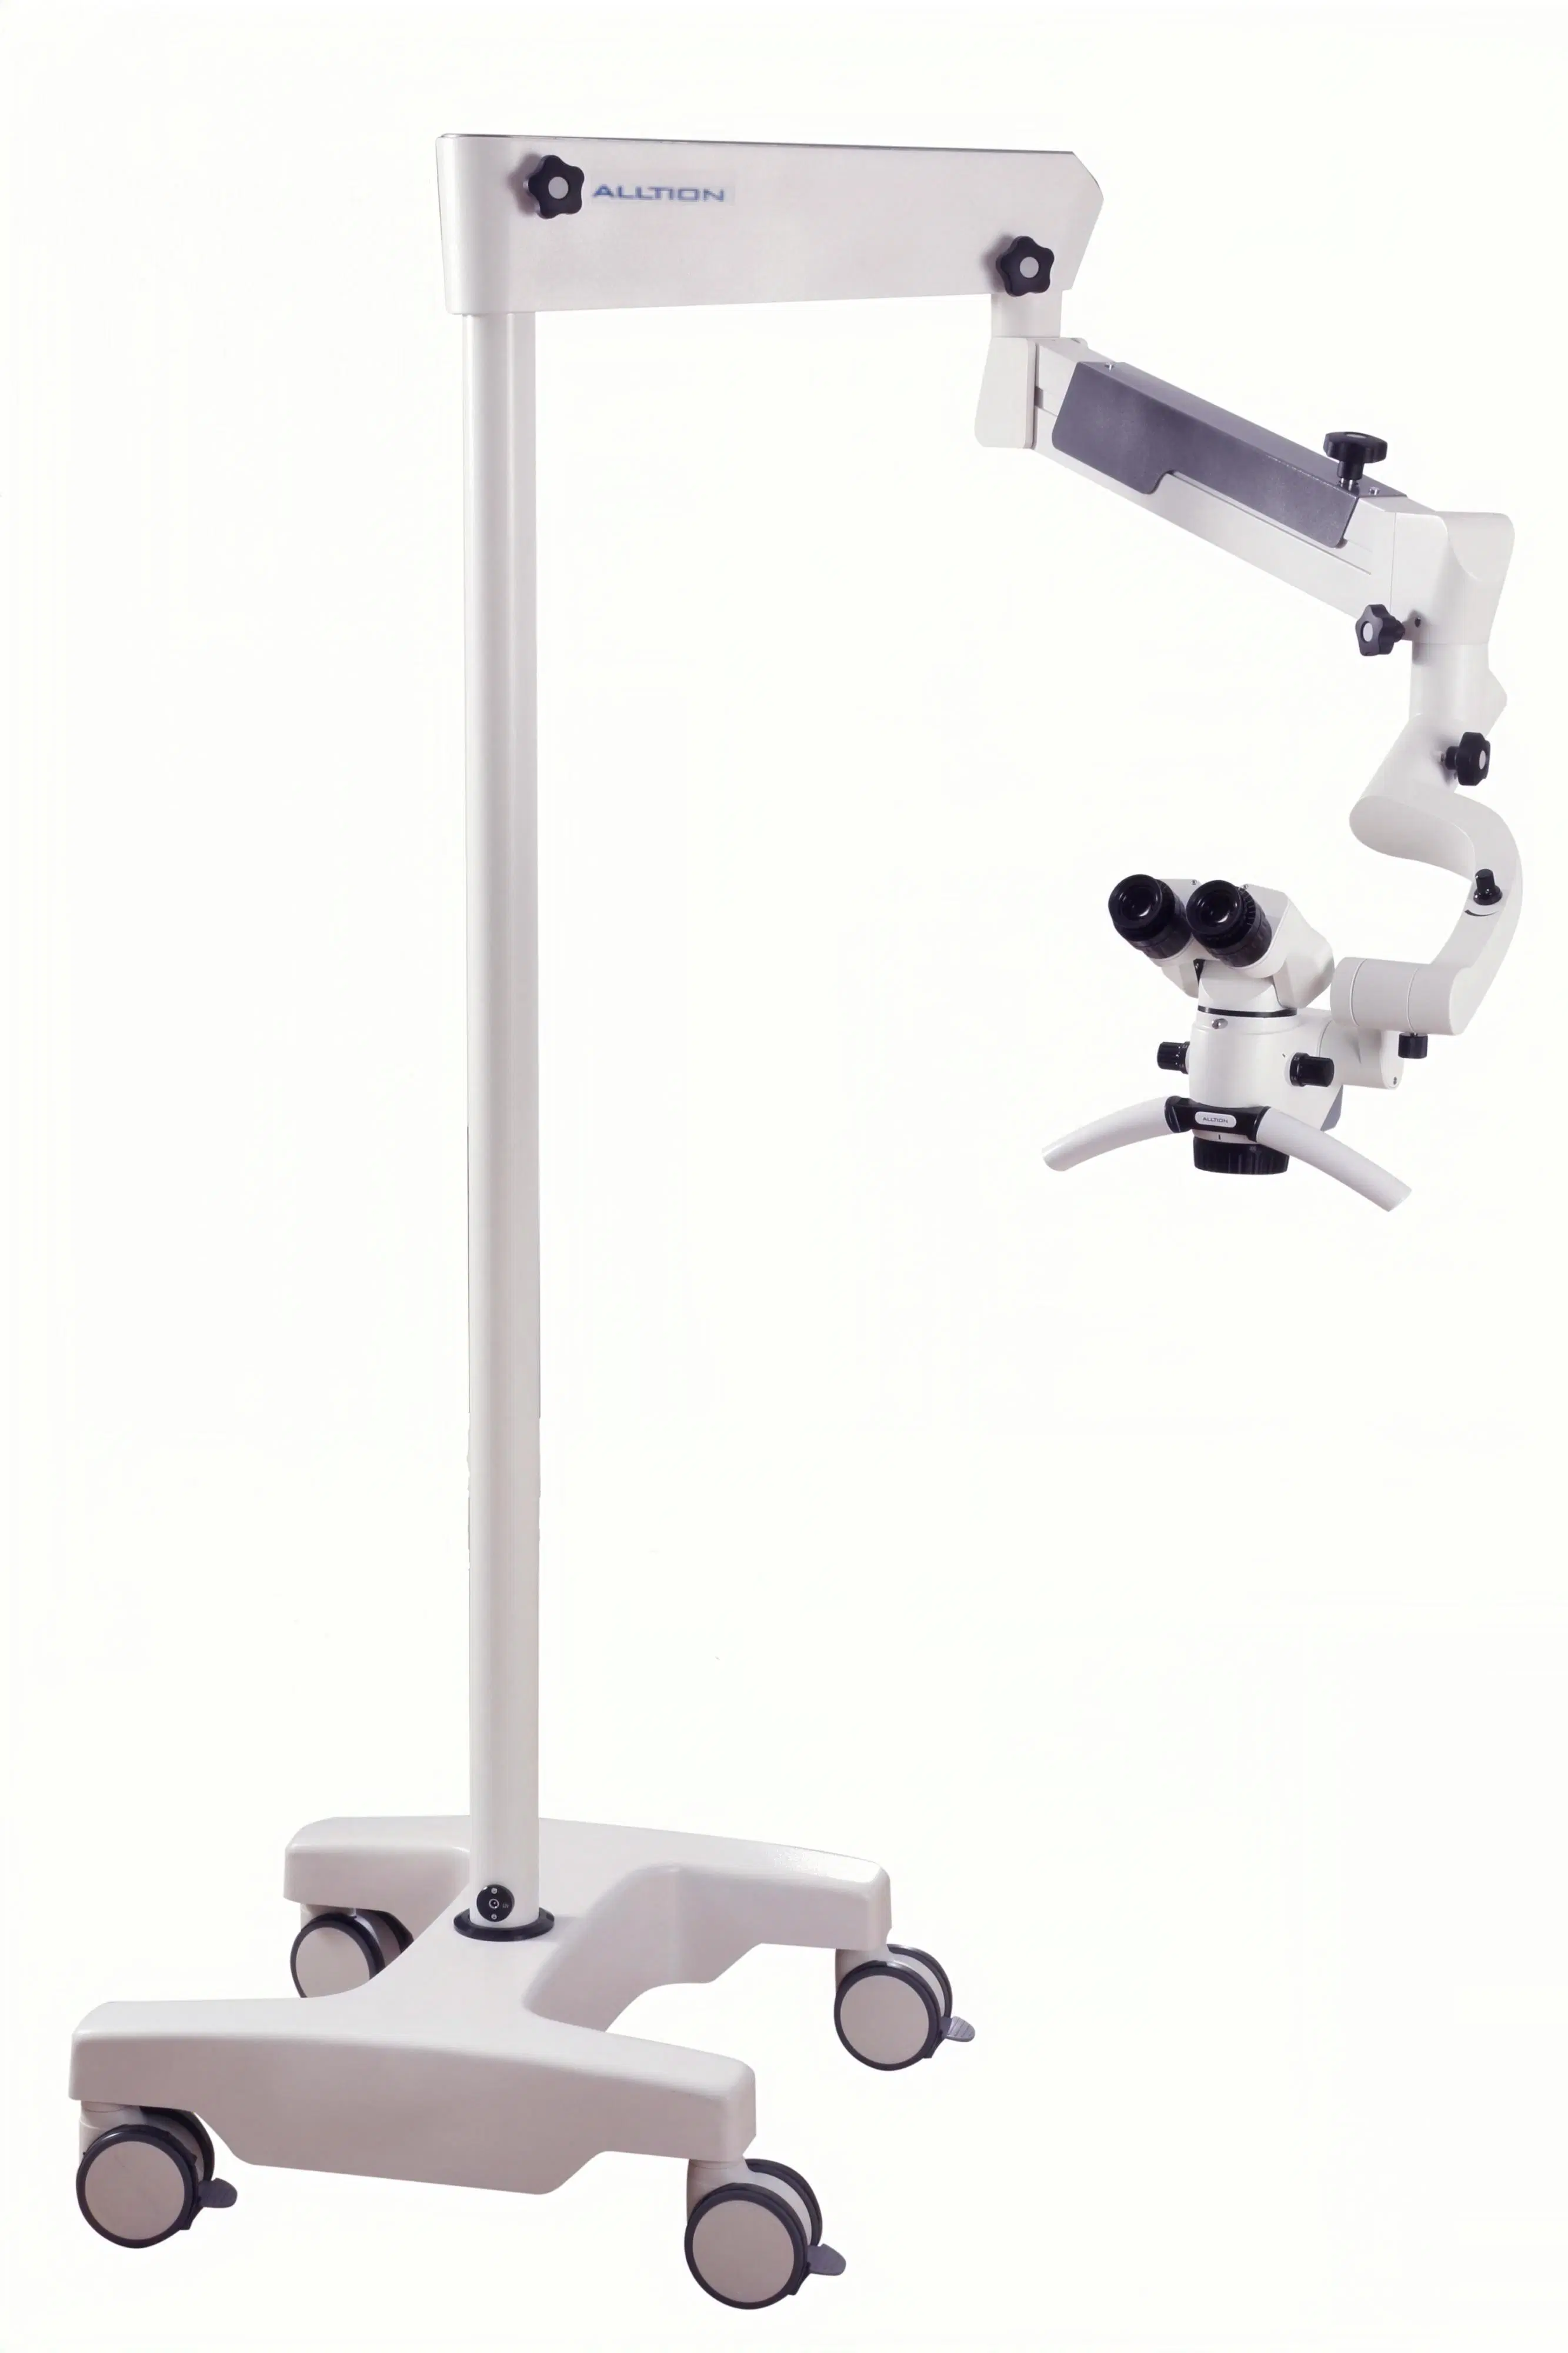 Am-2000 Microscope for Surgical Surgery Operation Operating in Ent Dental Orthopedics Hand Surgery Neurosurgery Andrology and Urology P & R Veterinary